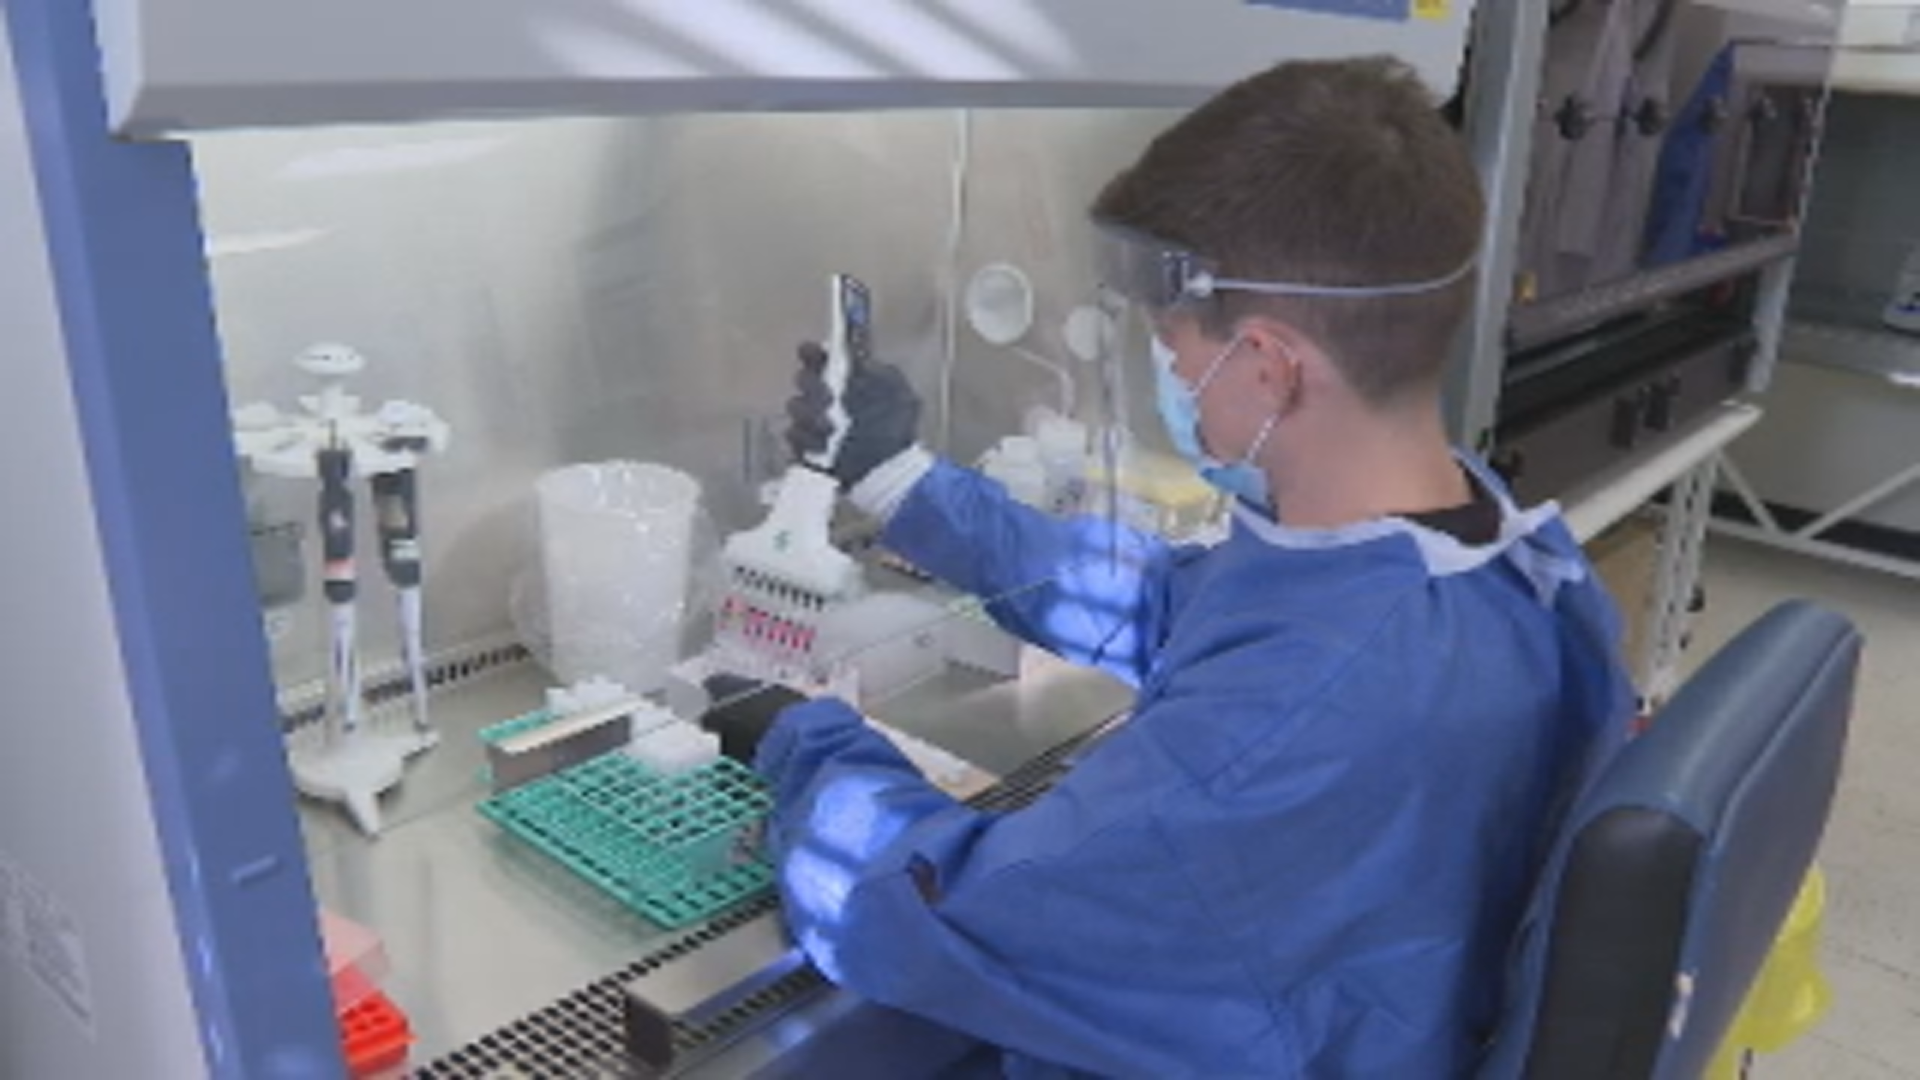 A sample being tested for COVID-19 at Nova Scotia’s microbiology lab at the QEII hospital